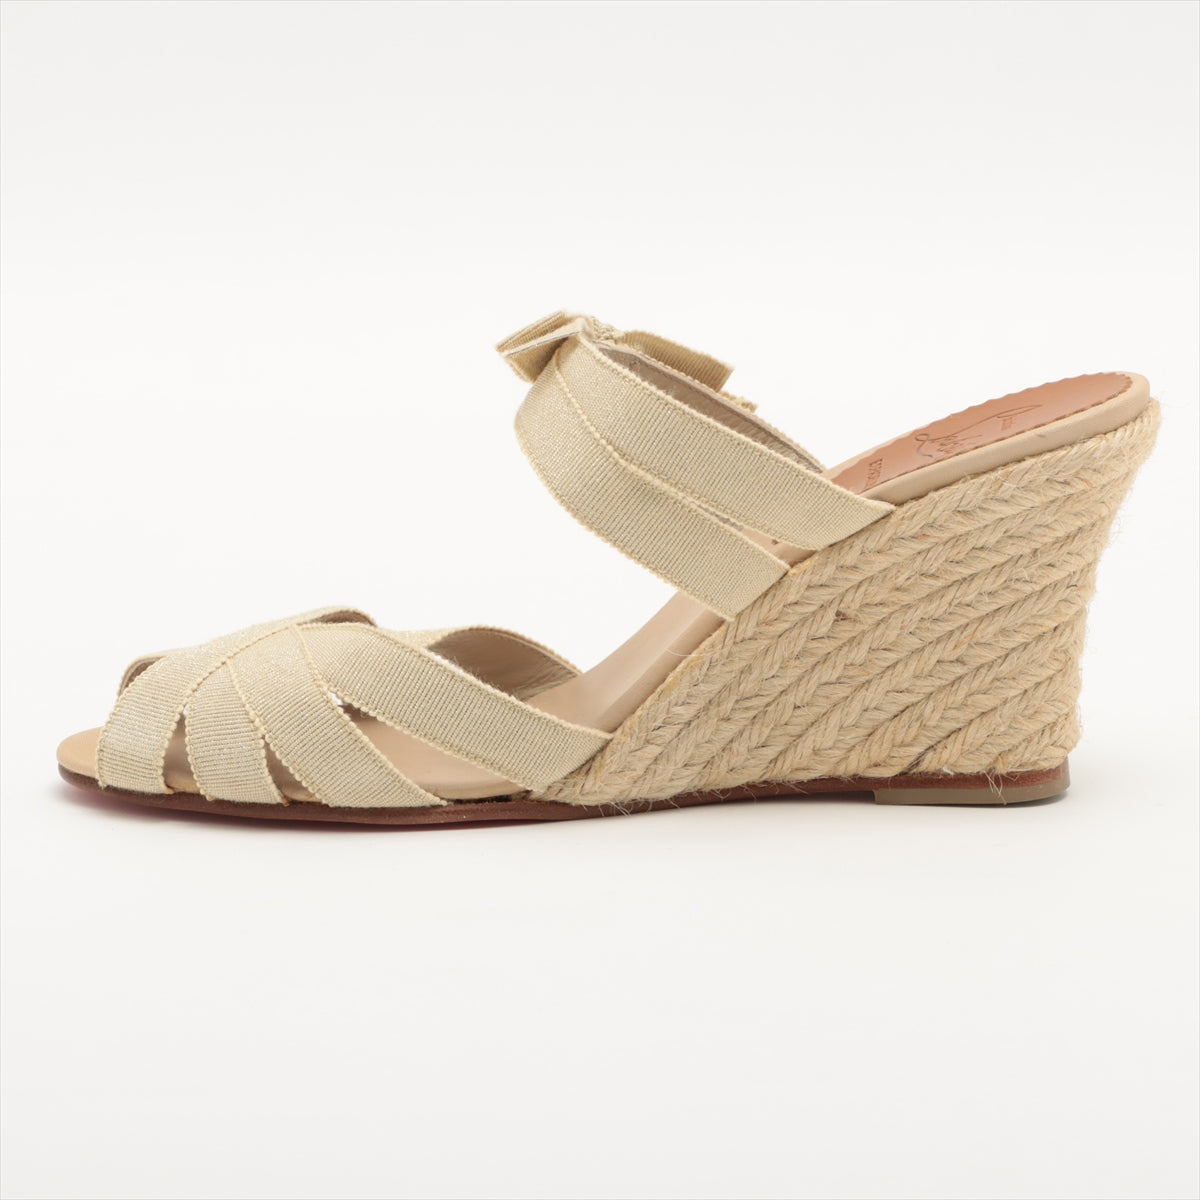 Christian Louboutin Fabric Wedge Sole Sandals 36 Ladies' Beige Box Bag Included Espadrilles